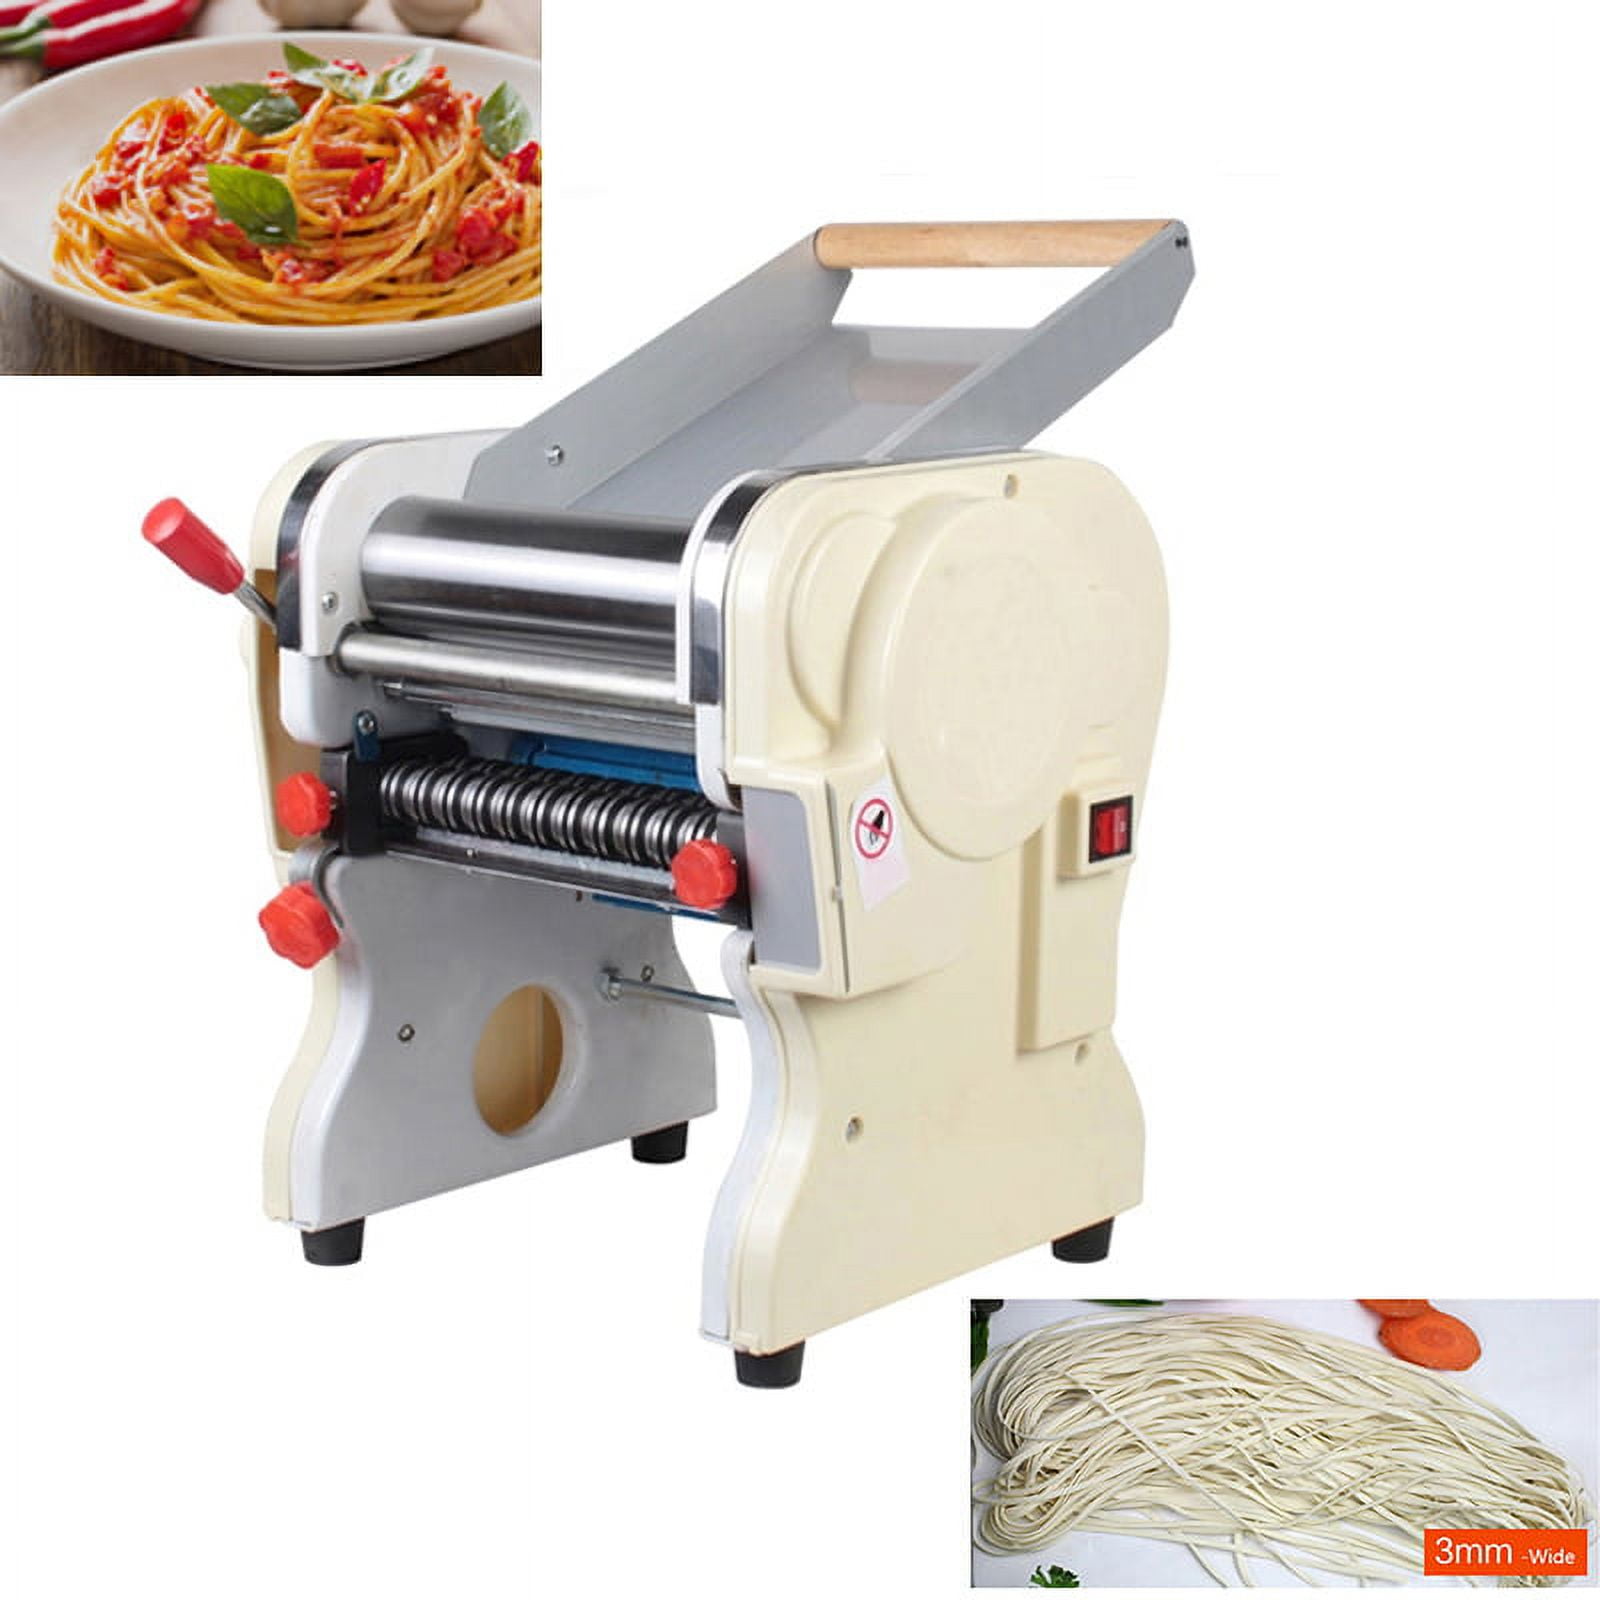 Techtongda Stainless Steel Electric Pasta Press Maker Noodle Machine Home  Commercial 110v (3mm and 9mm wide knife #020344)